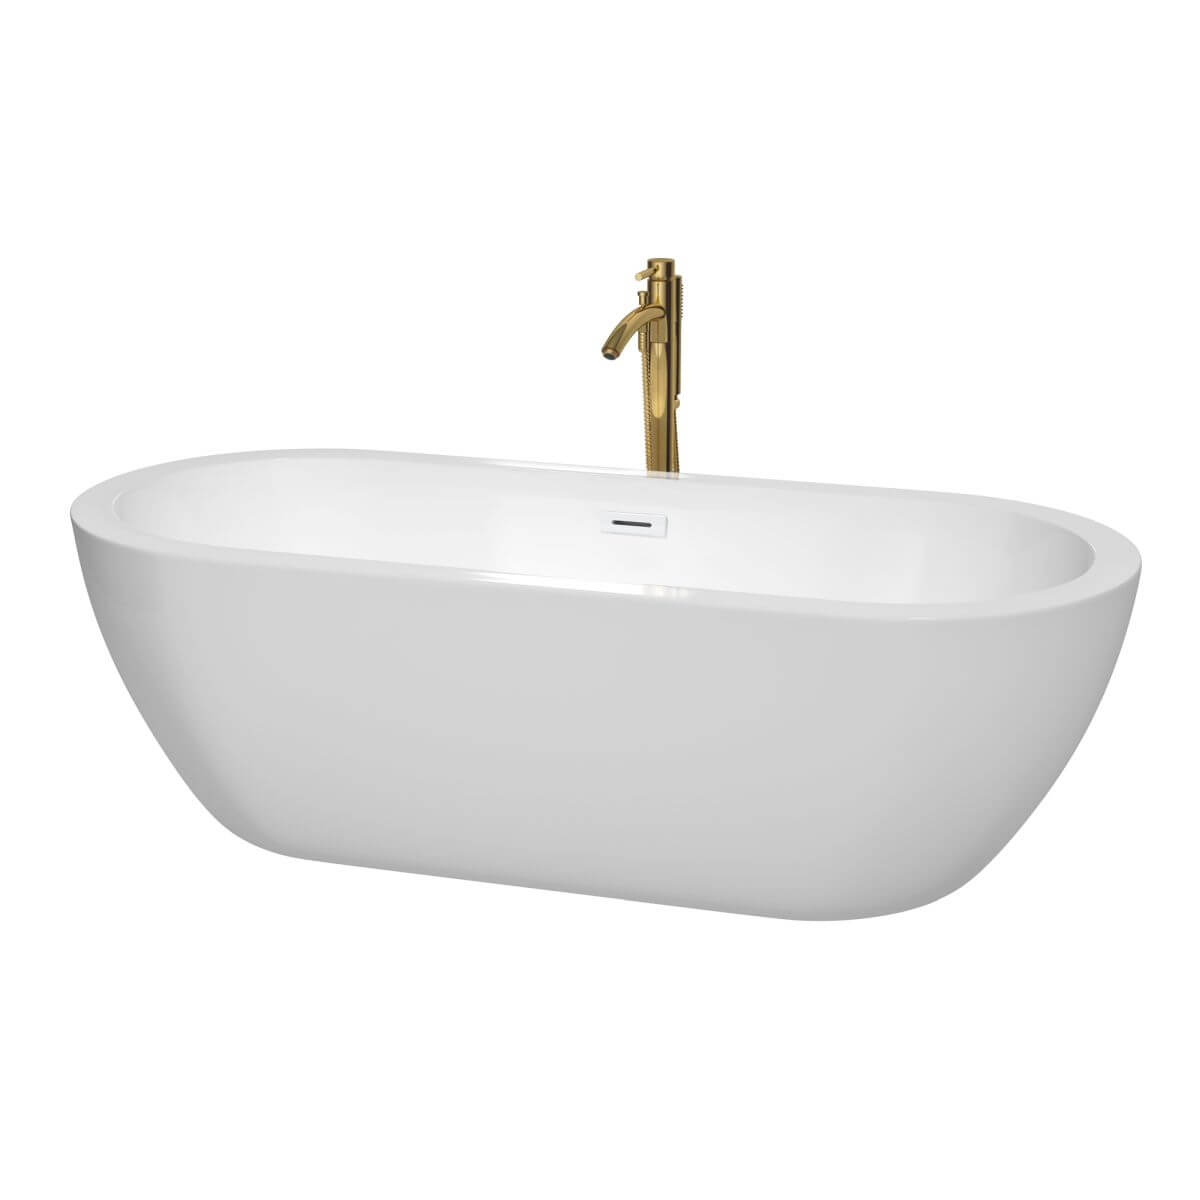 Wyndham Collection Soho 72 inch Freestanding Bathtub in White with Shiny White Trim and Floor Mounted Faucet in Brushed Gold - WCOBT100272SWATPGD